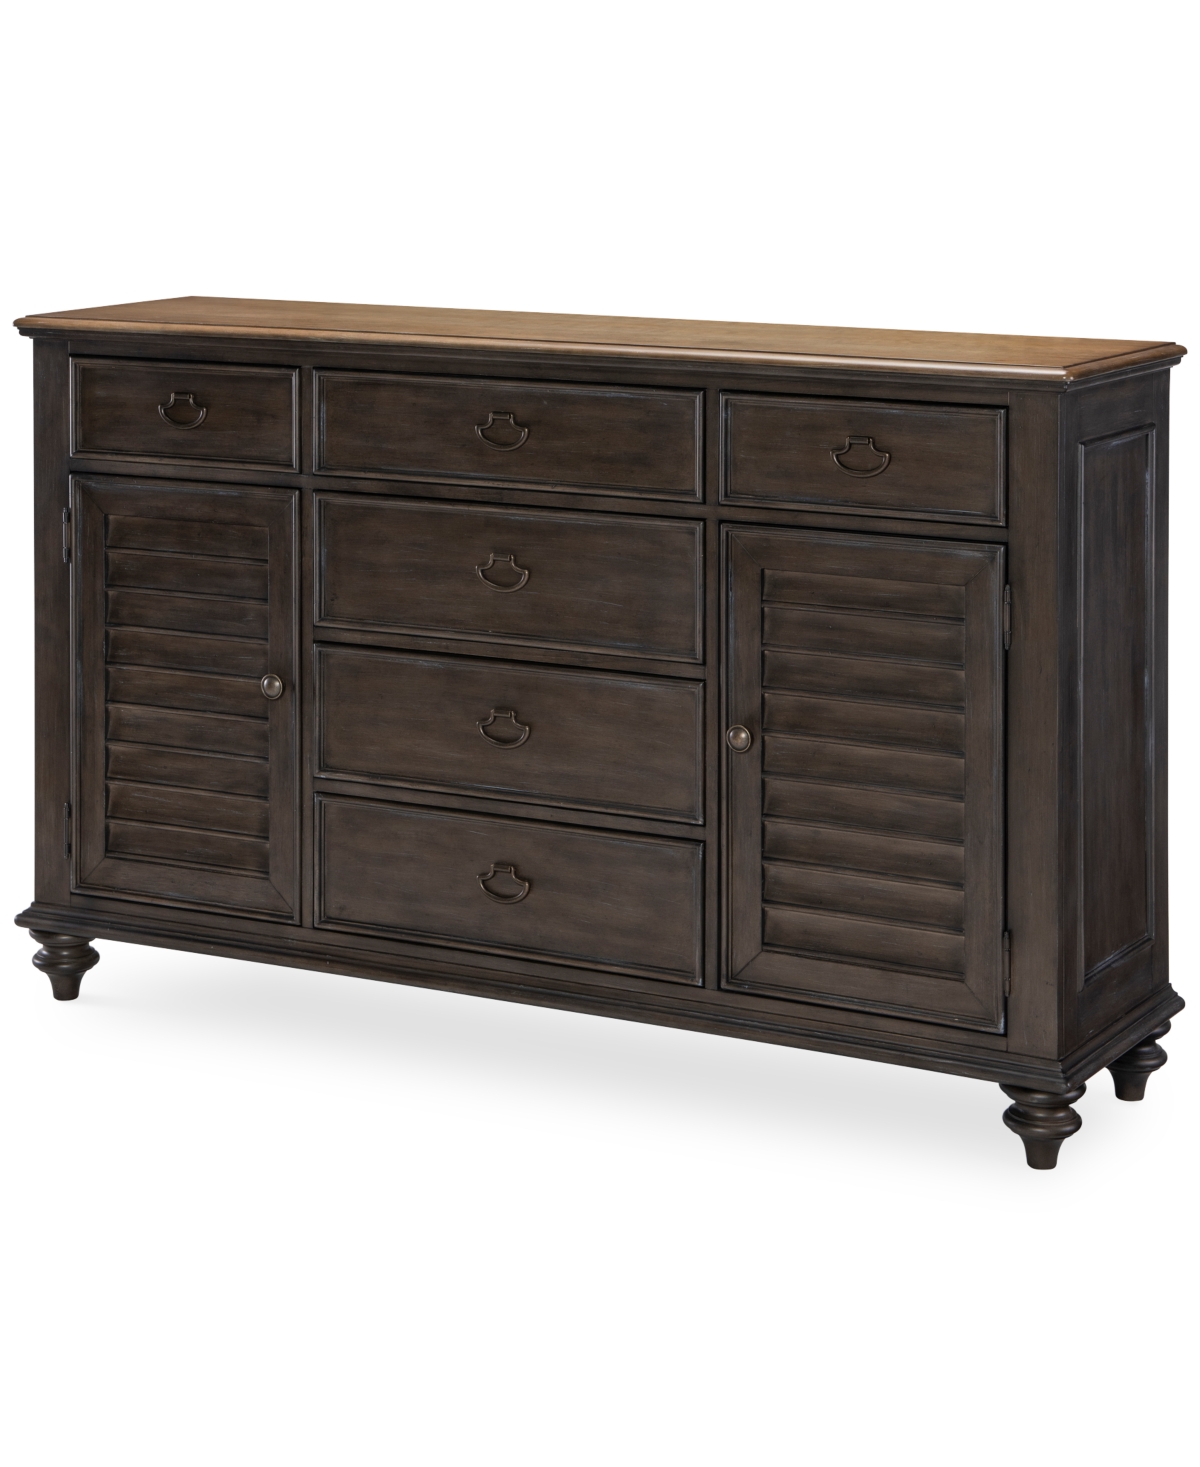 Macy's Mandeville Louvered Dresser In Brown